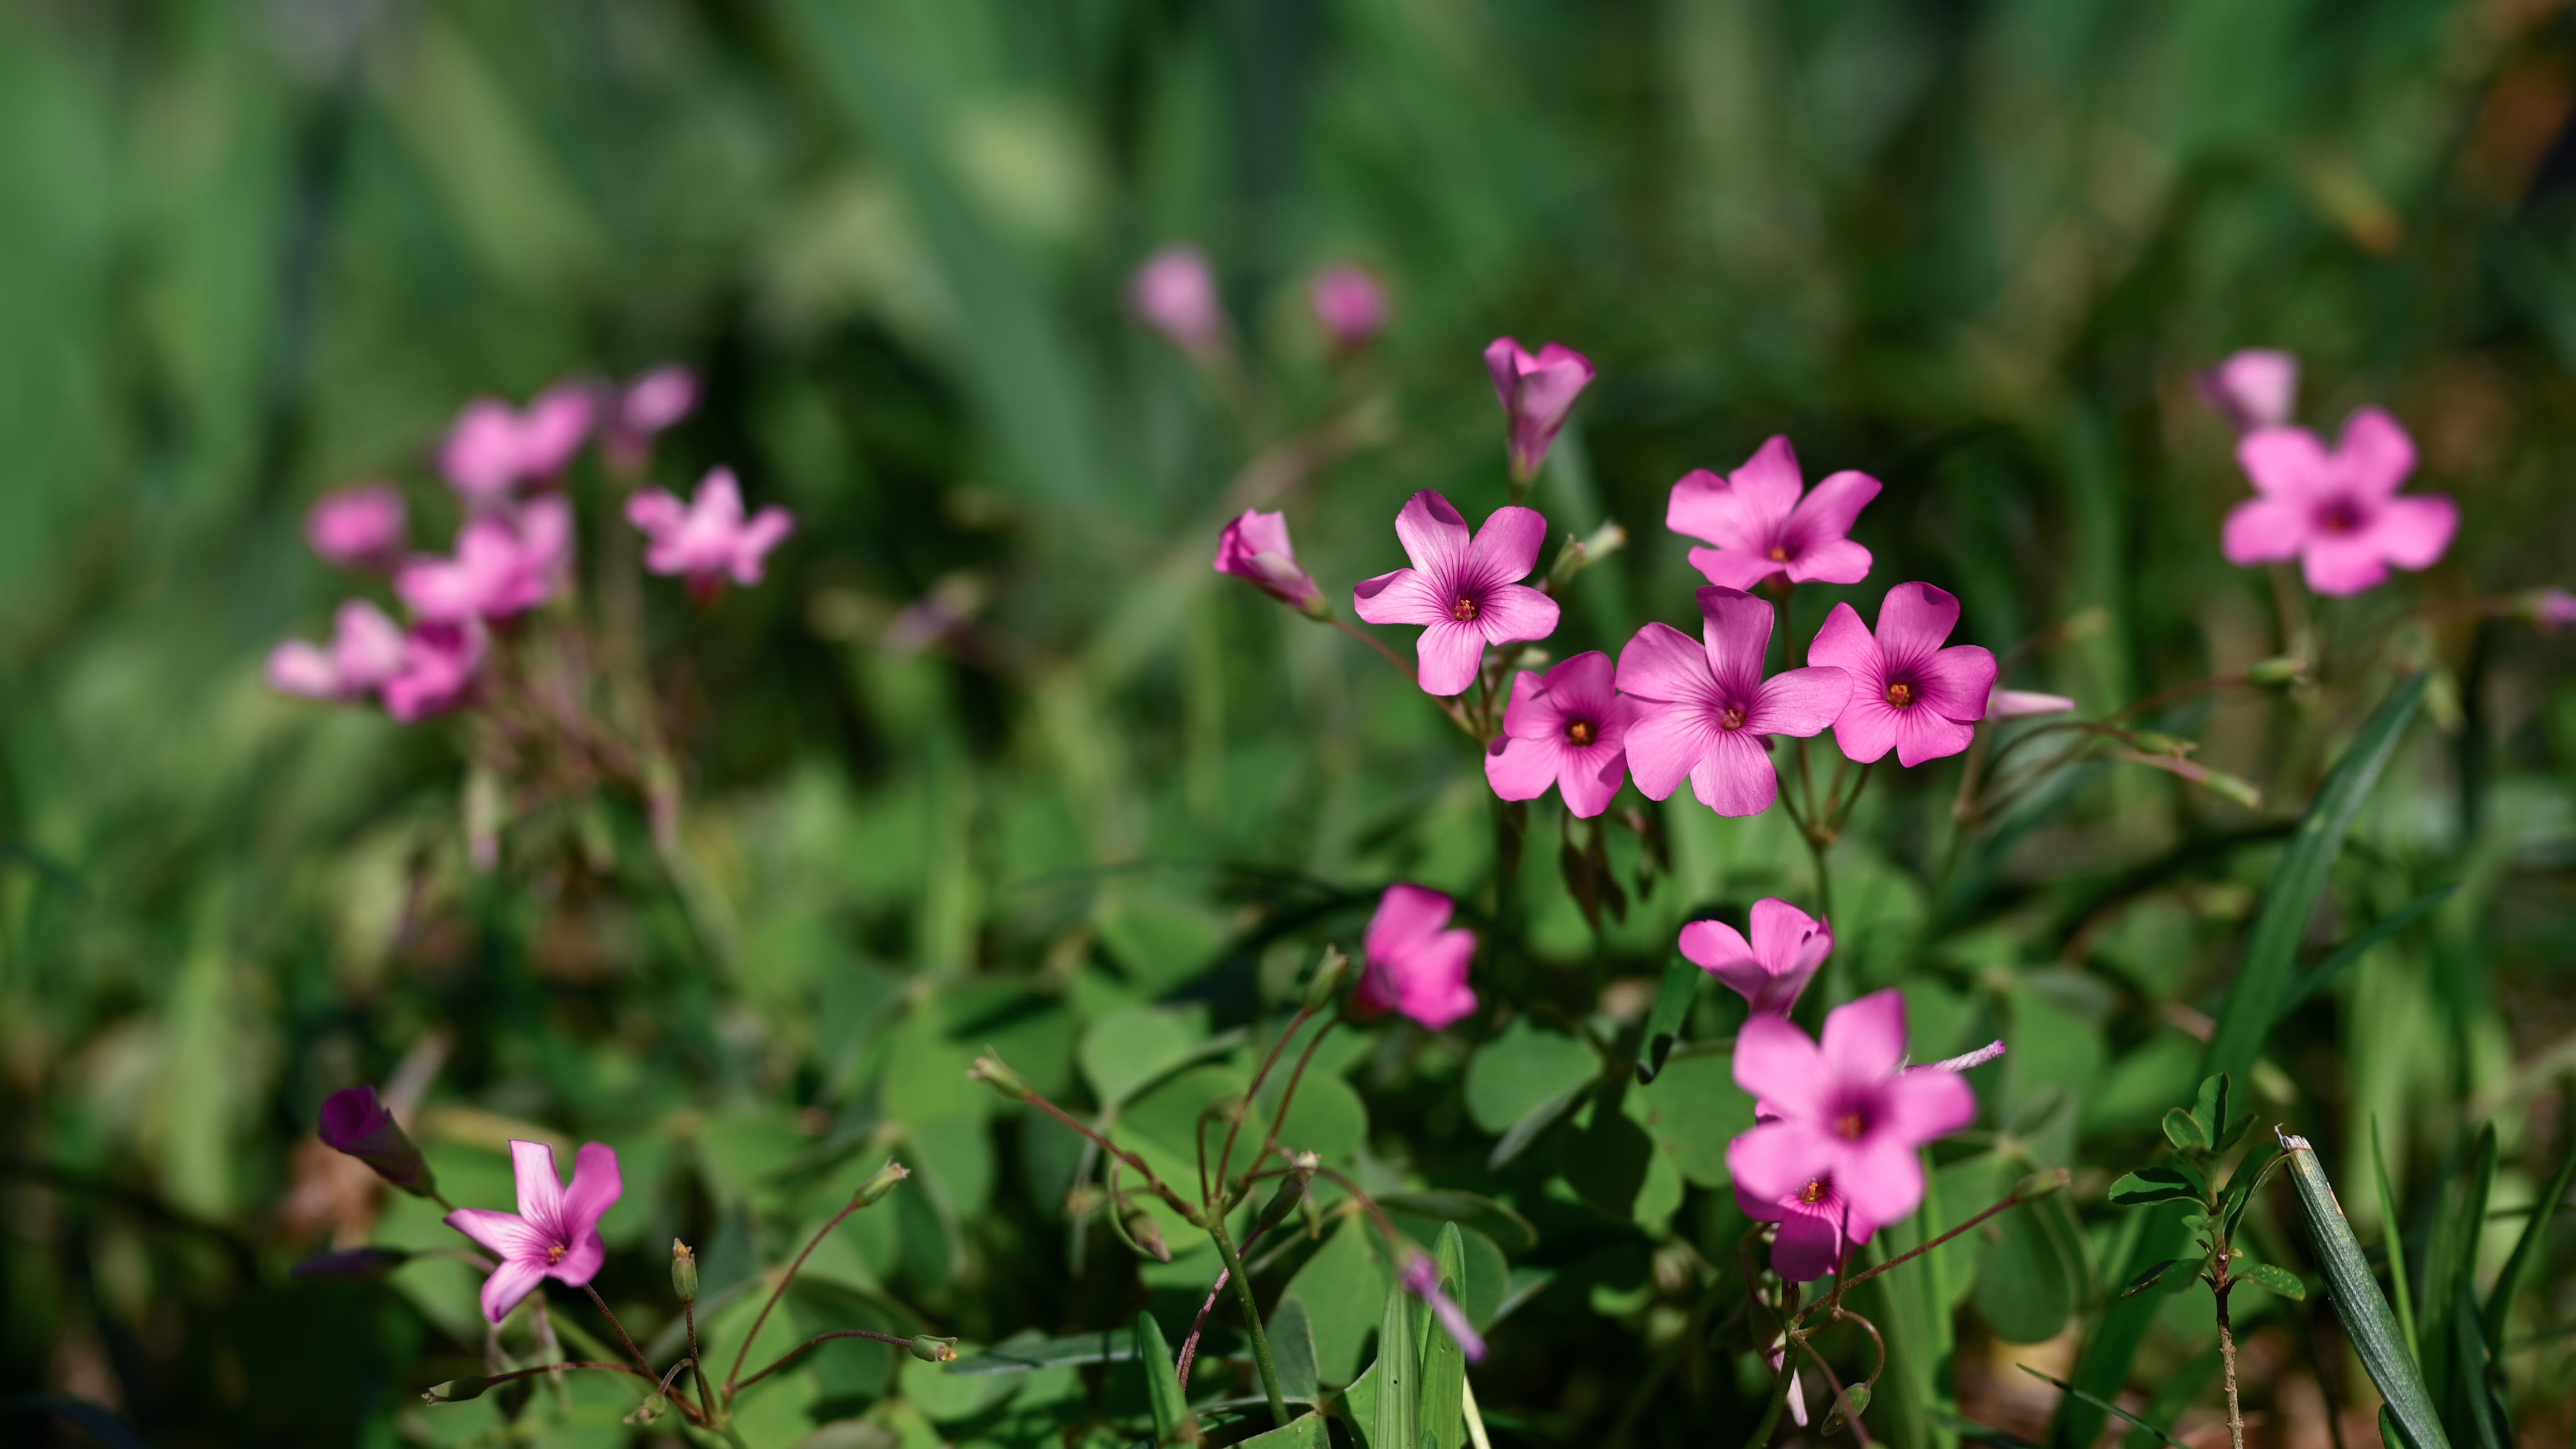 General 4640x2610 photography nature flowers plants spring pink outdoors